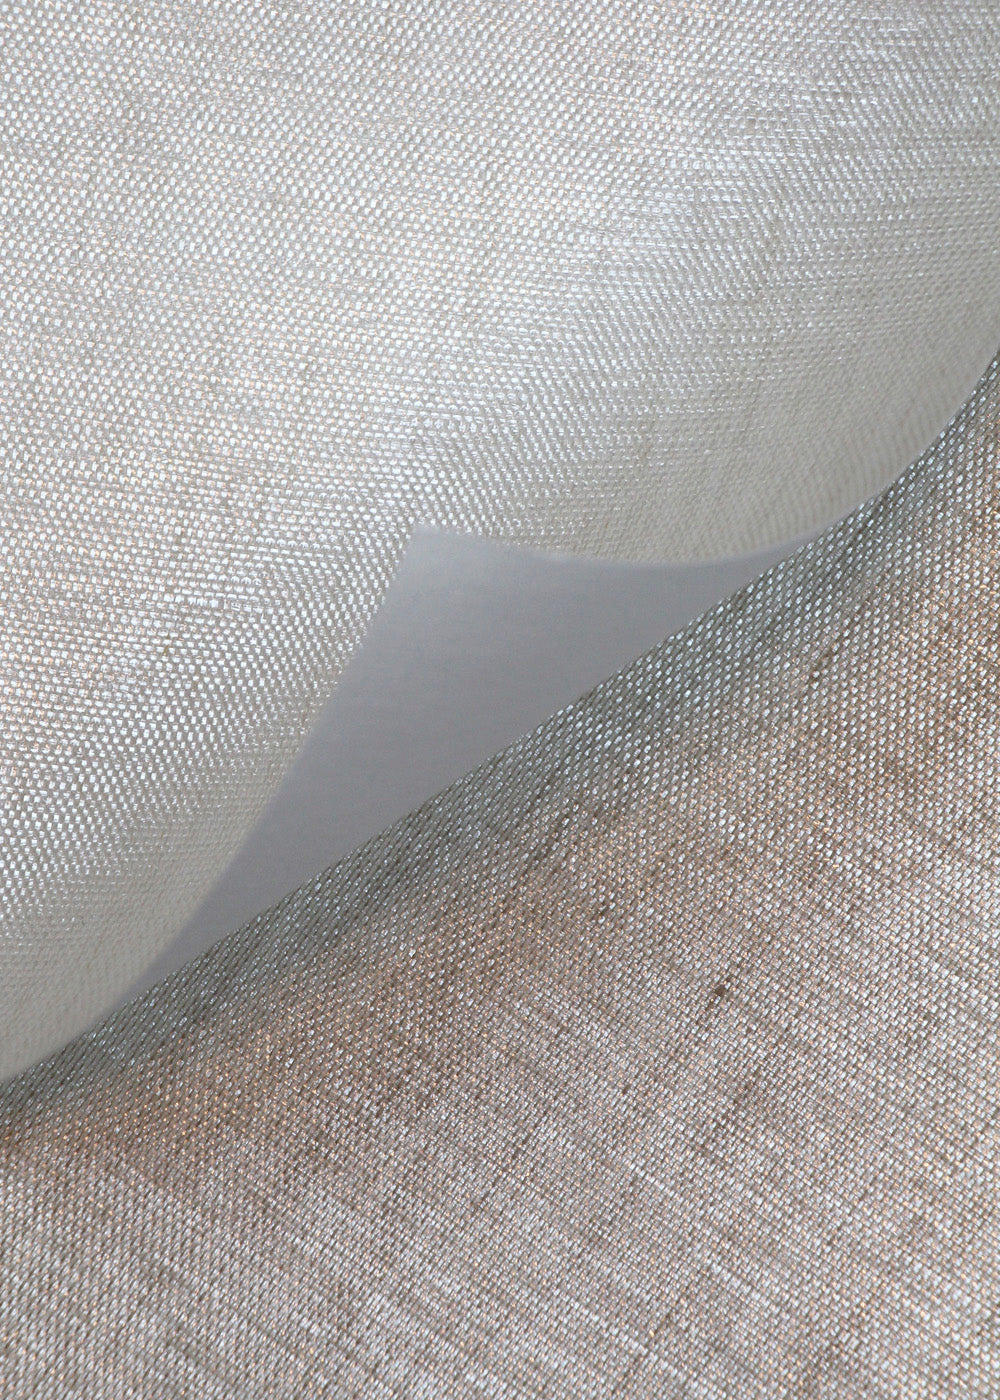 linen wallcovering in white and light taupe